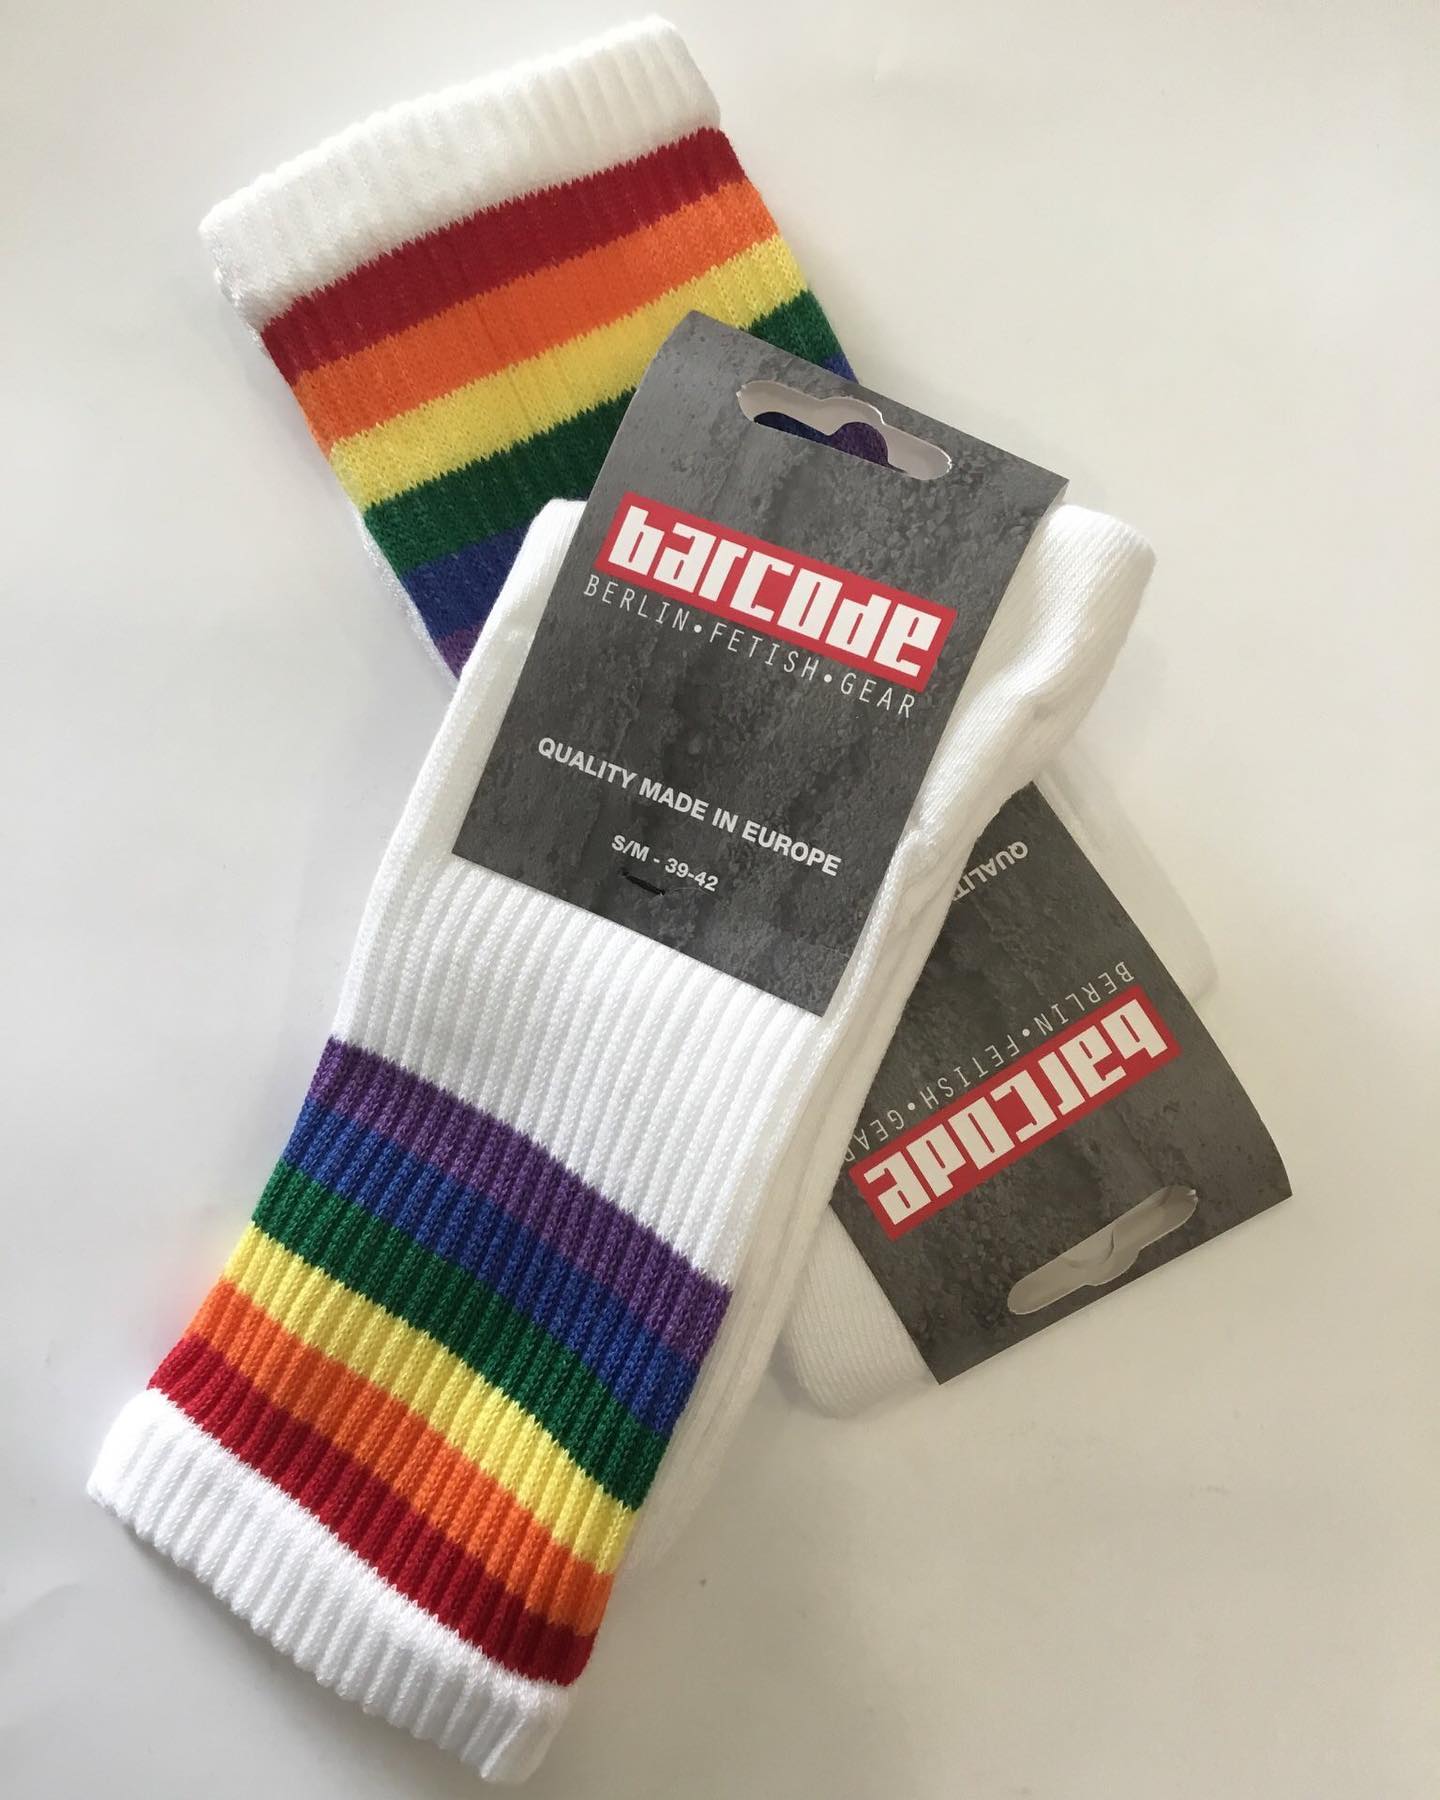 A selection of Pride themed underwear and socks are now back in stock! Read all about the Pride Collection of Barcode:
____
http://www.menandunderwear.com/2022/05/pride-themed-underwear-and-socks-back-in-stock.html